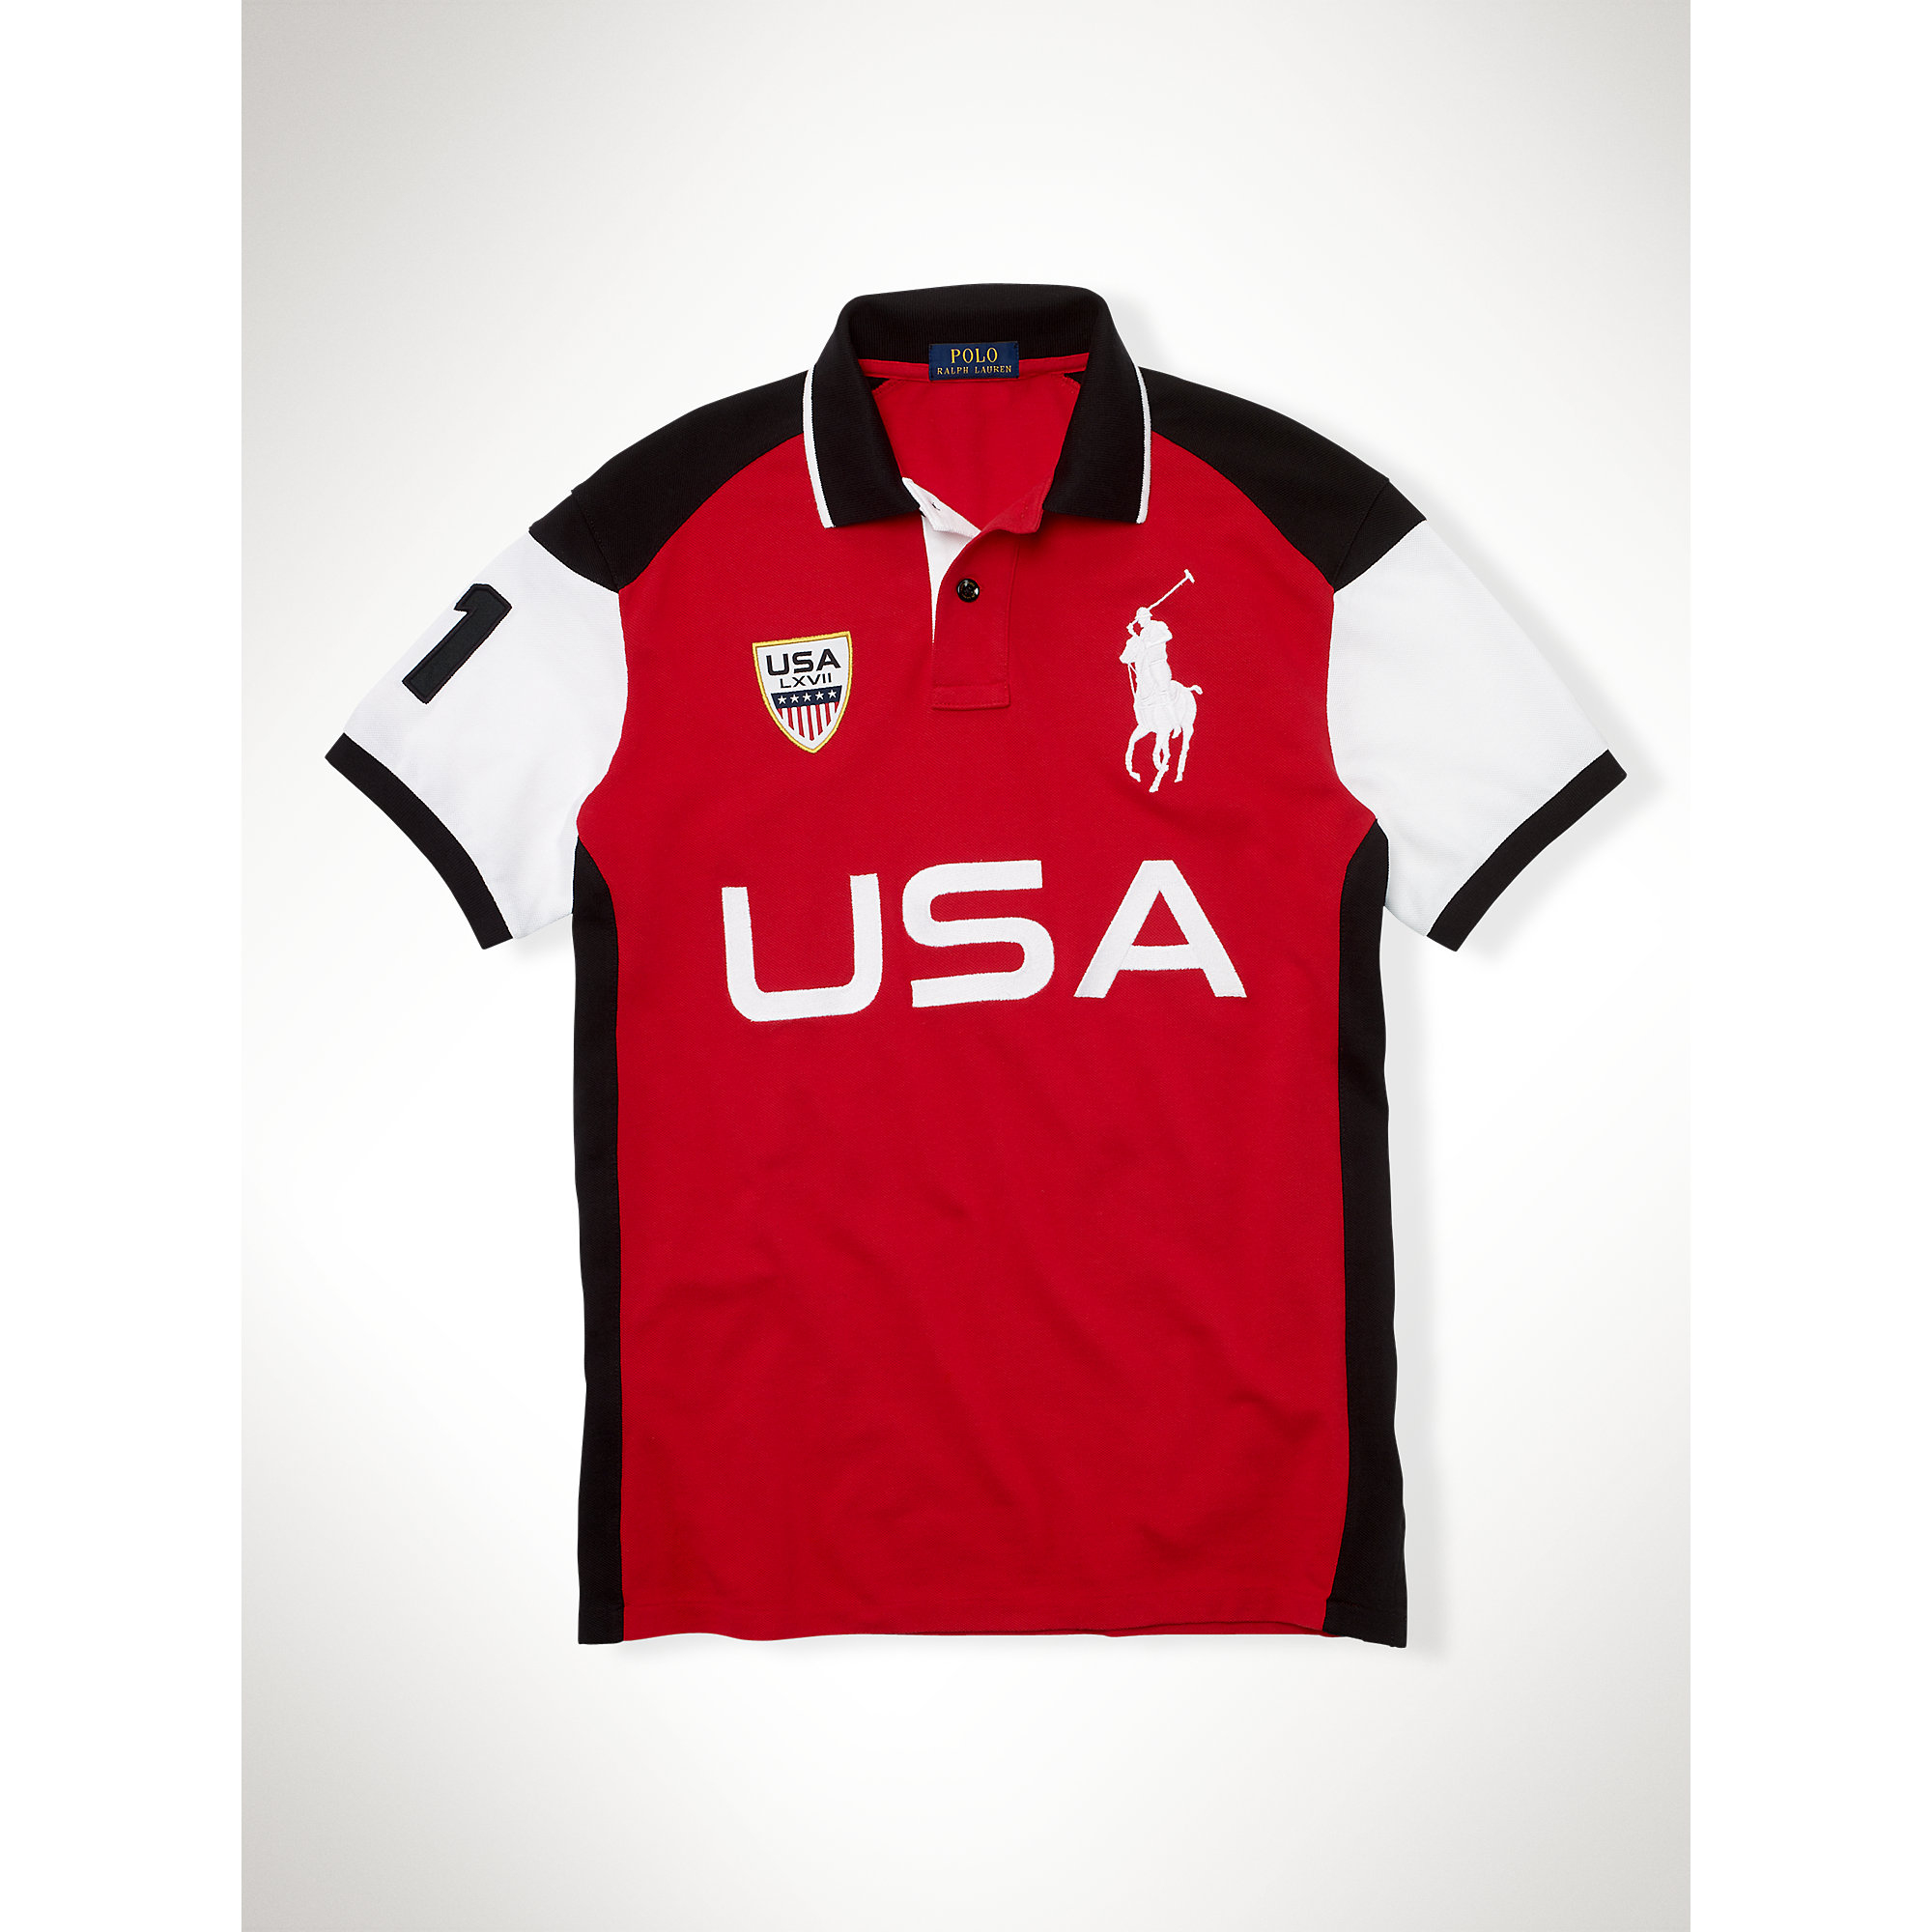 Polo Ralph Lauren Usa Polo Shirt - Prism Contractors & Engineers